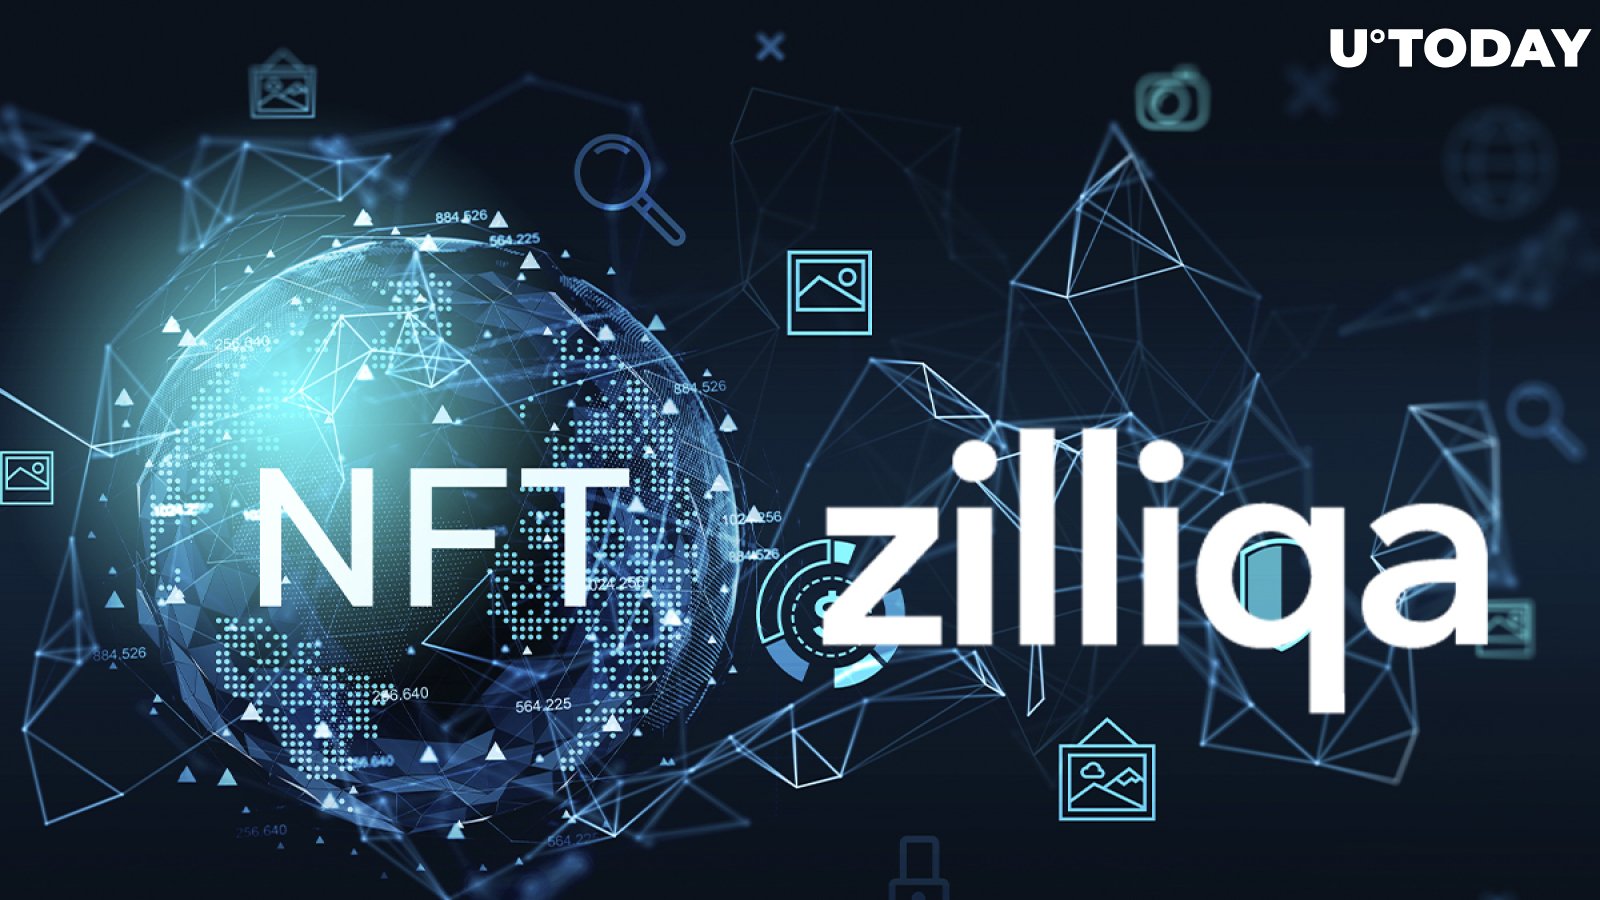 Zilliqa (ZIL) to Have Its Own NFT Marketplace